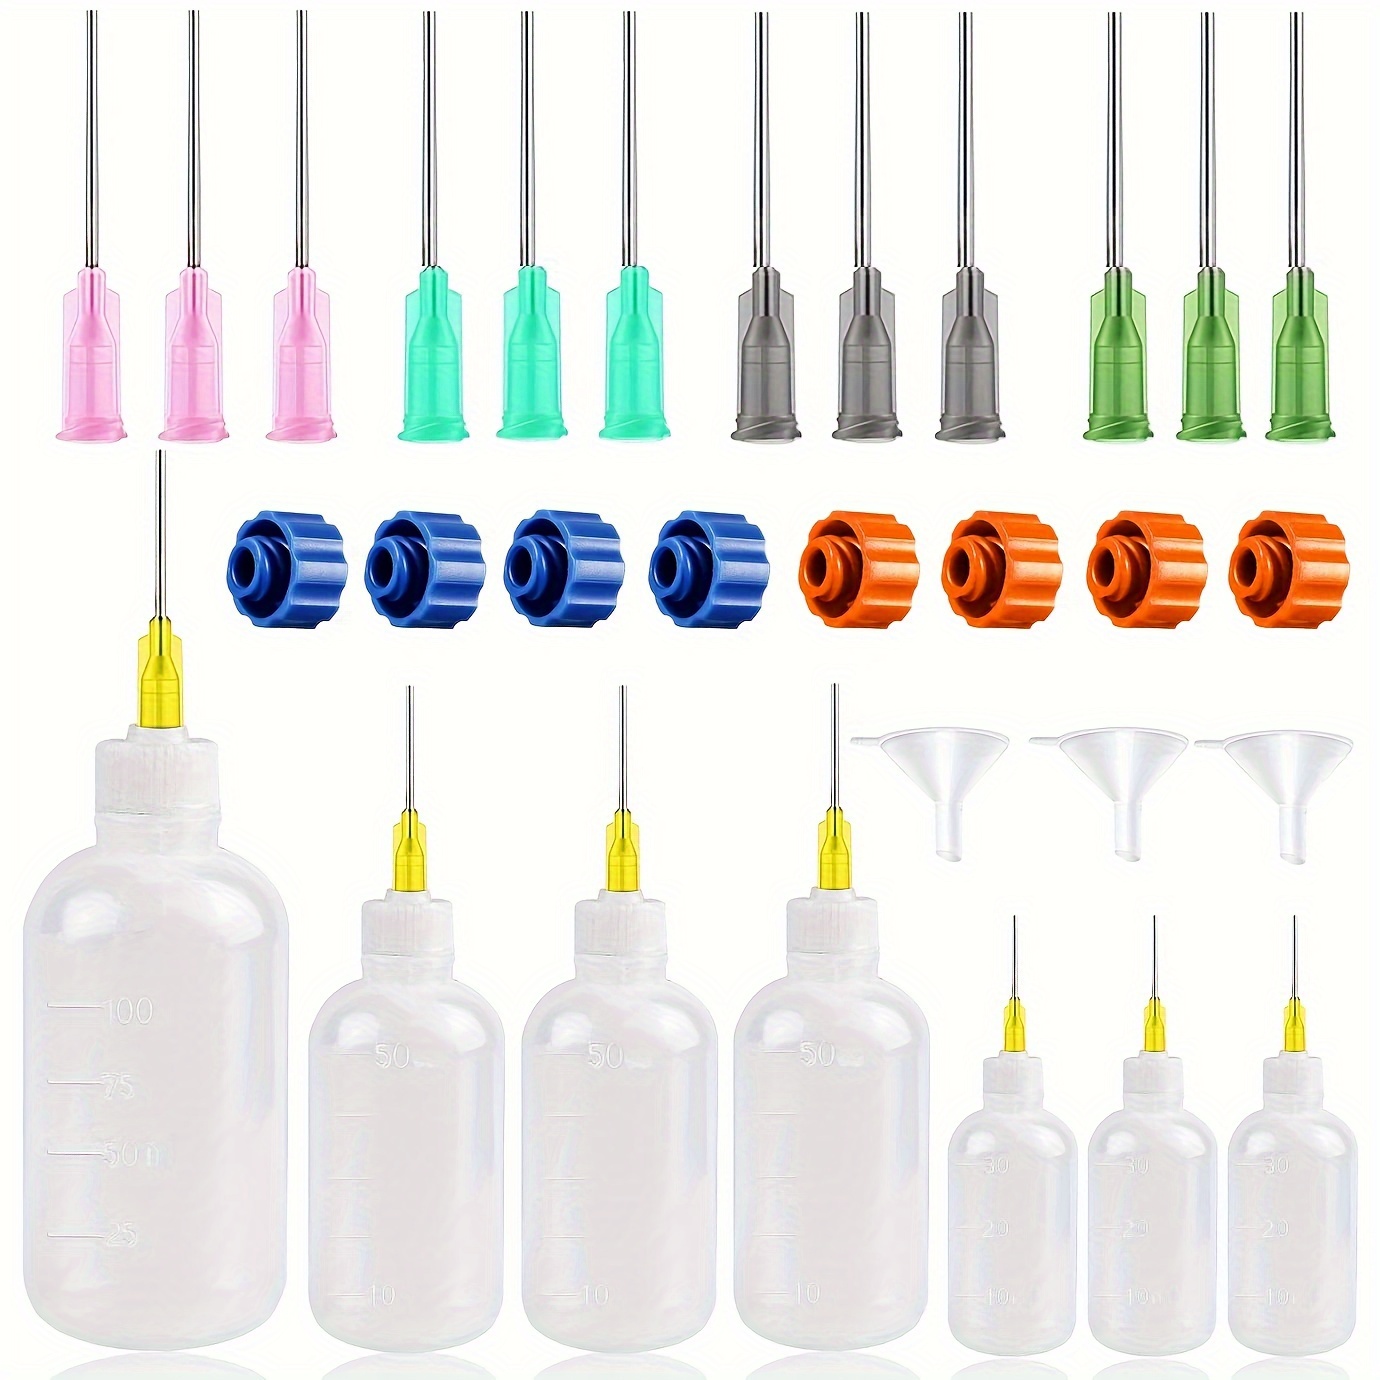 

Value Pack 24pcs Needle Tip Glue Bottle Applicator Set, 30ml 50ml 100ml Plastic Squeeze Dropper Bottle With 8 Lids And 12 Blunt Needle Tips For Craft Art Projects, Paint Down Craft And Oil